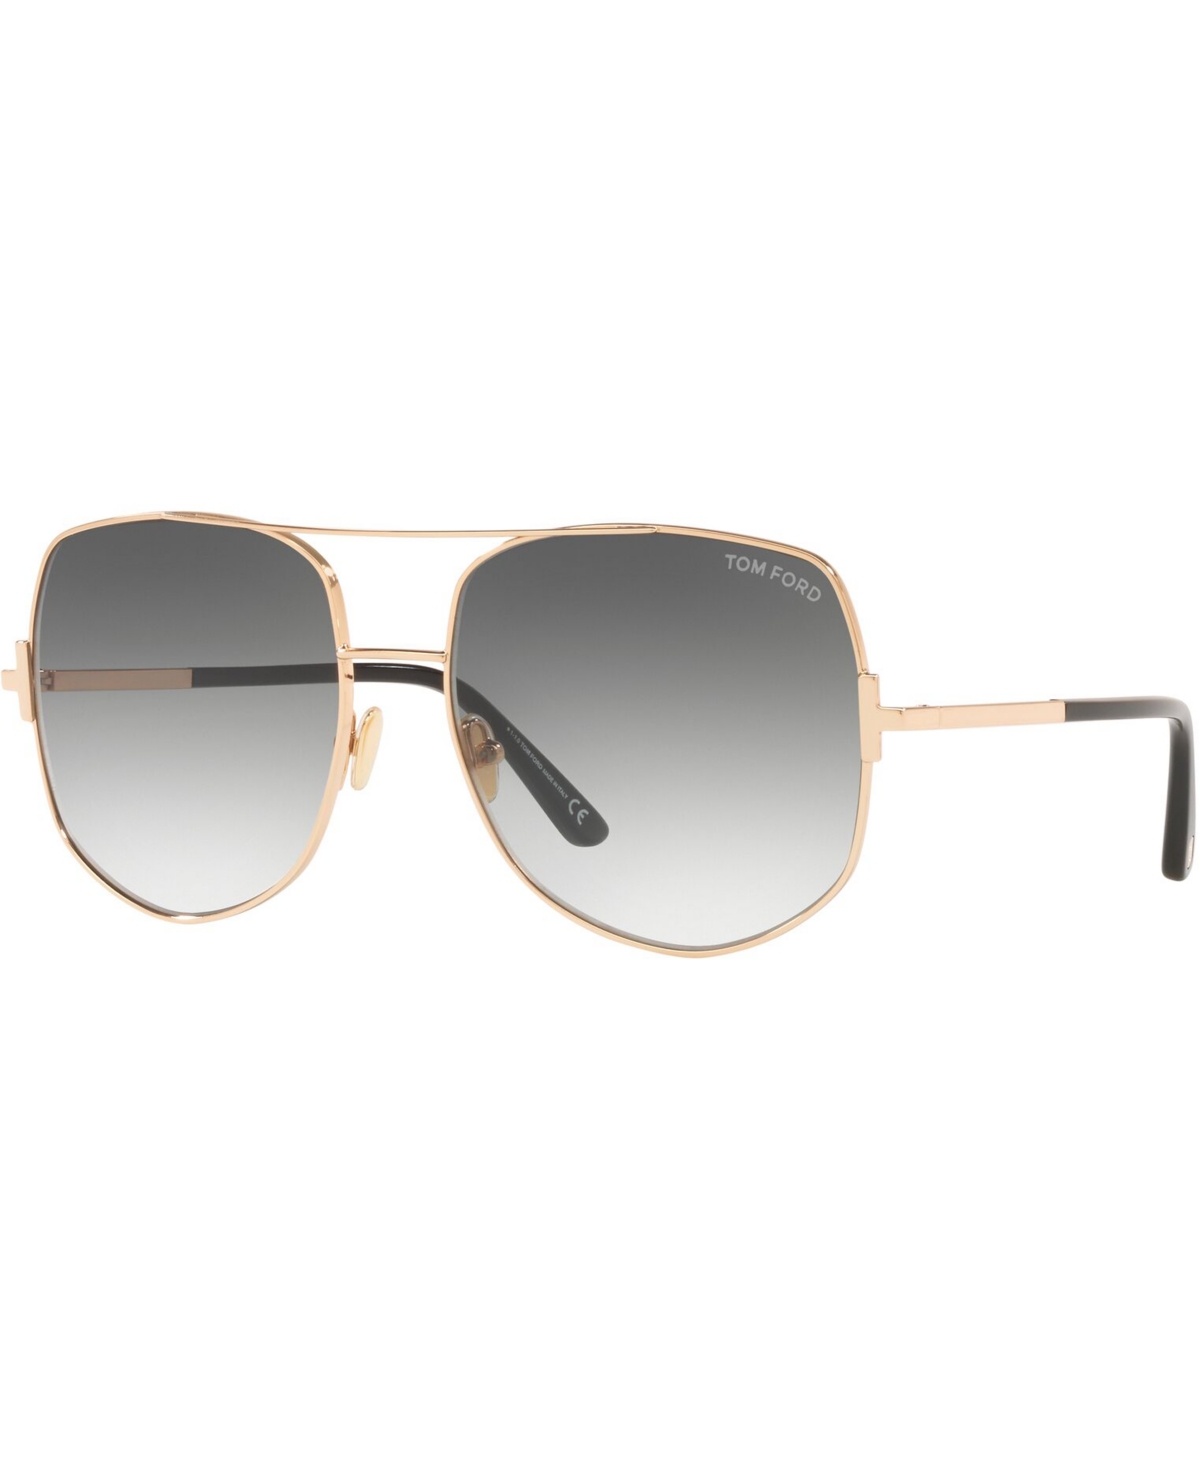 Tom Ford Women's Sunglasses, Tr001209 In Pink Gold,grey Grad